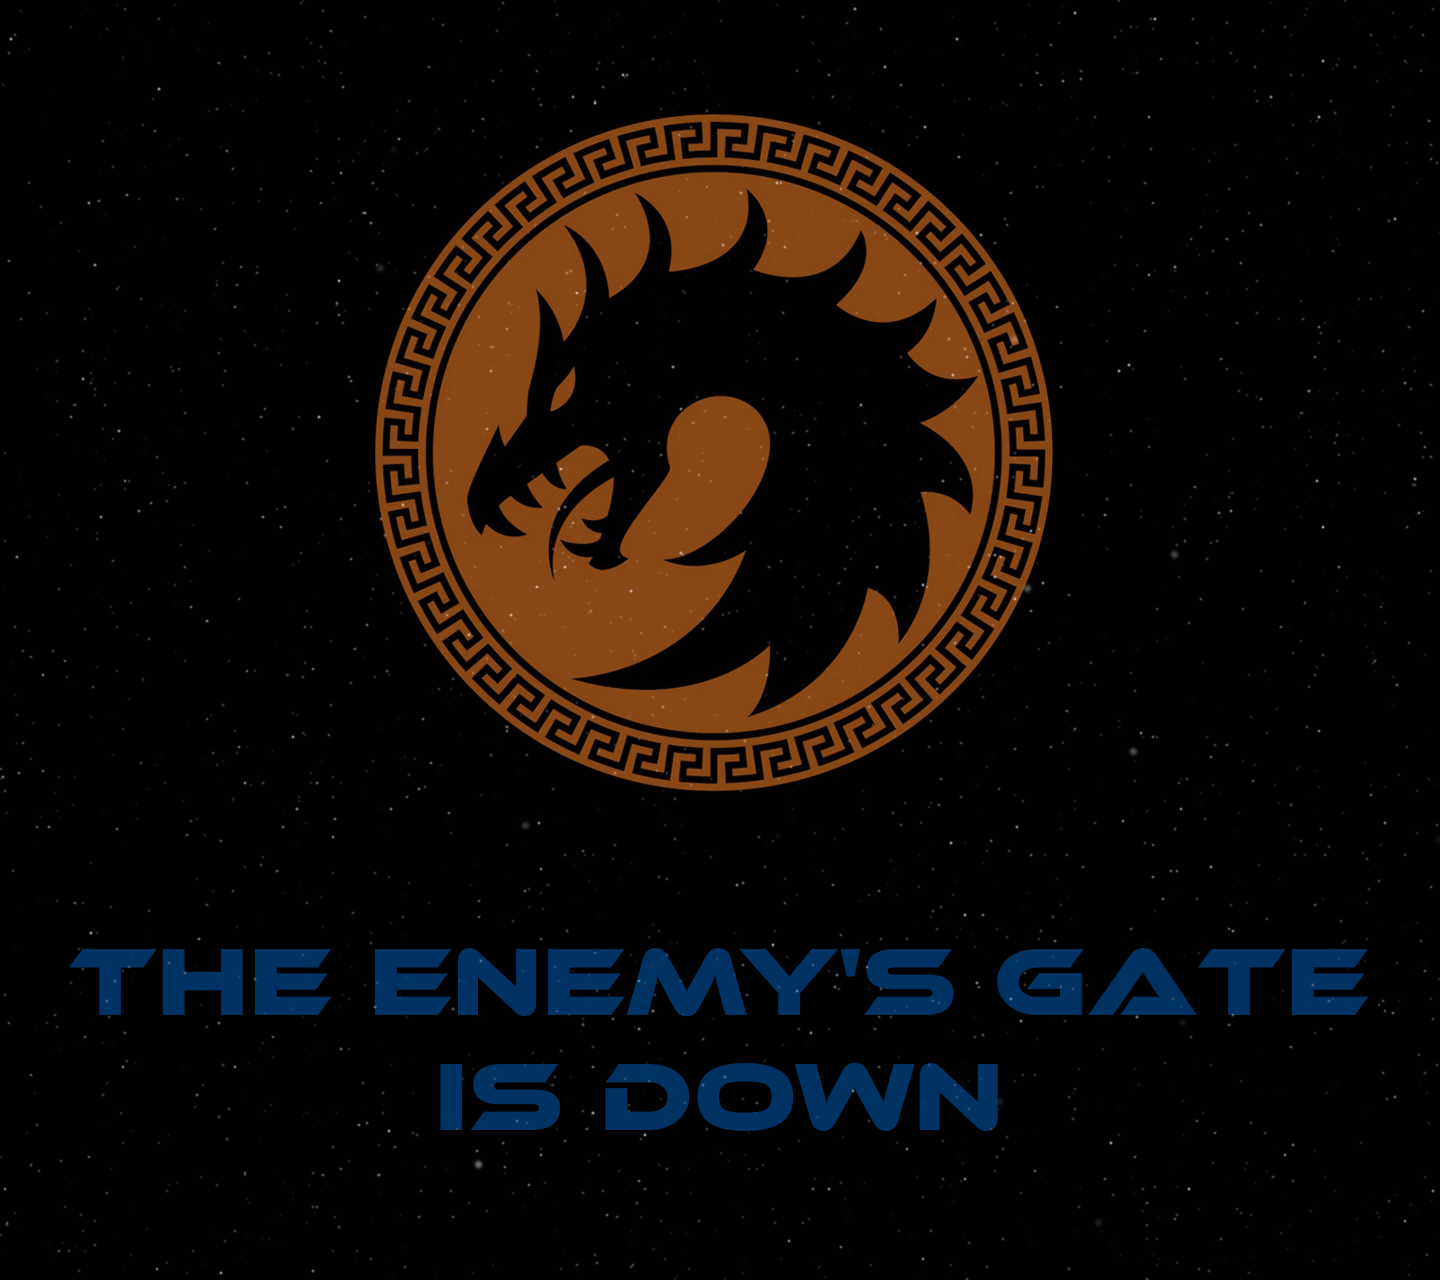 I made an Ender's game wallpaper for my Galaxy SIII